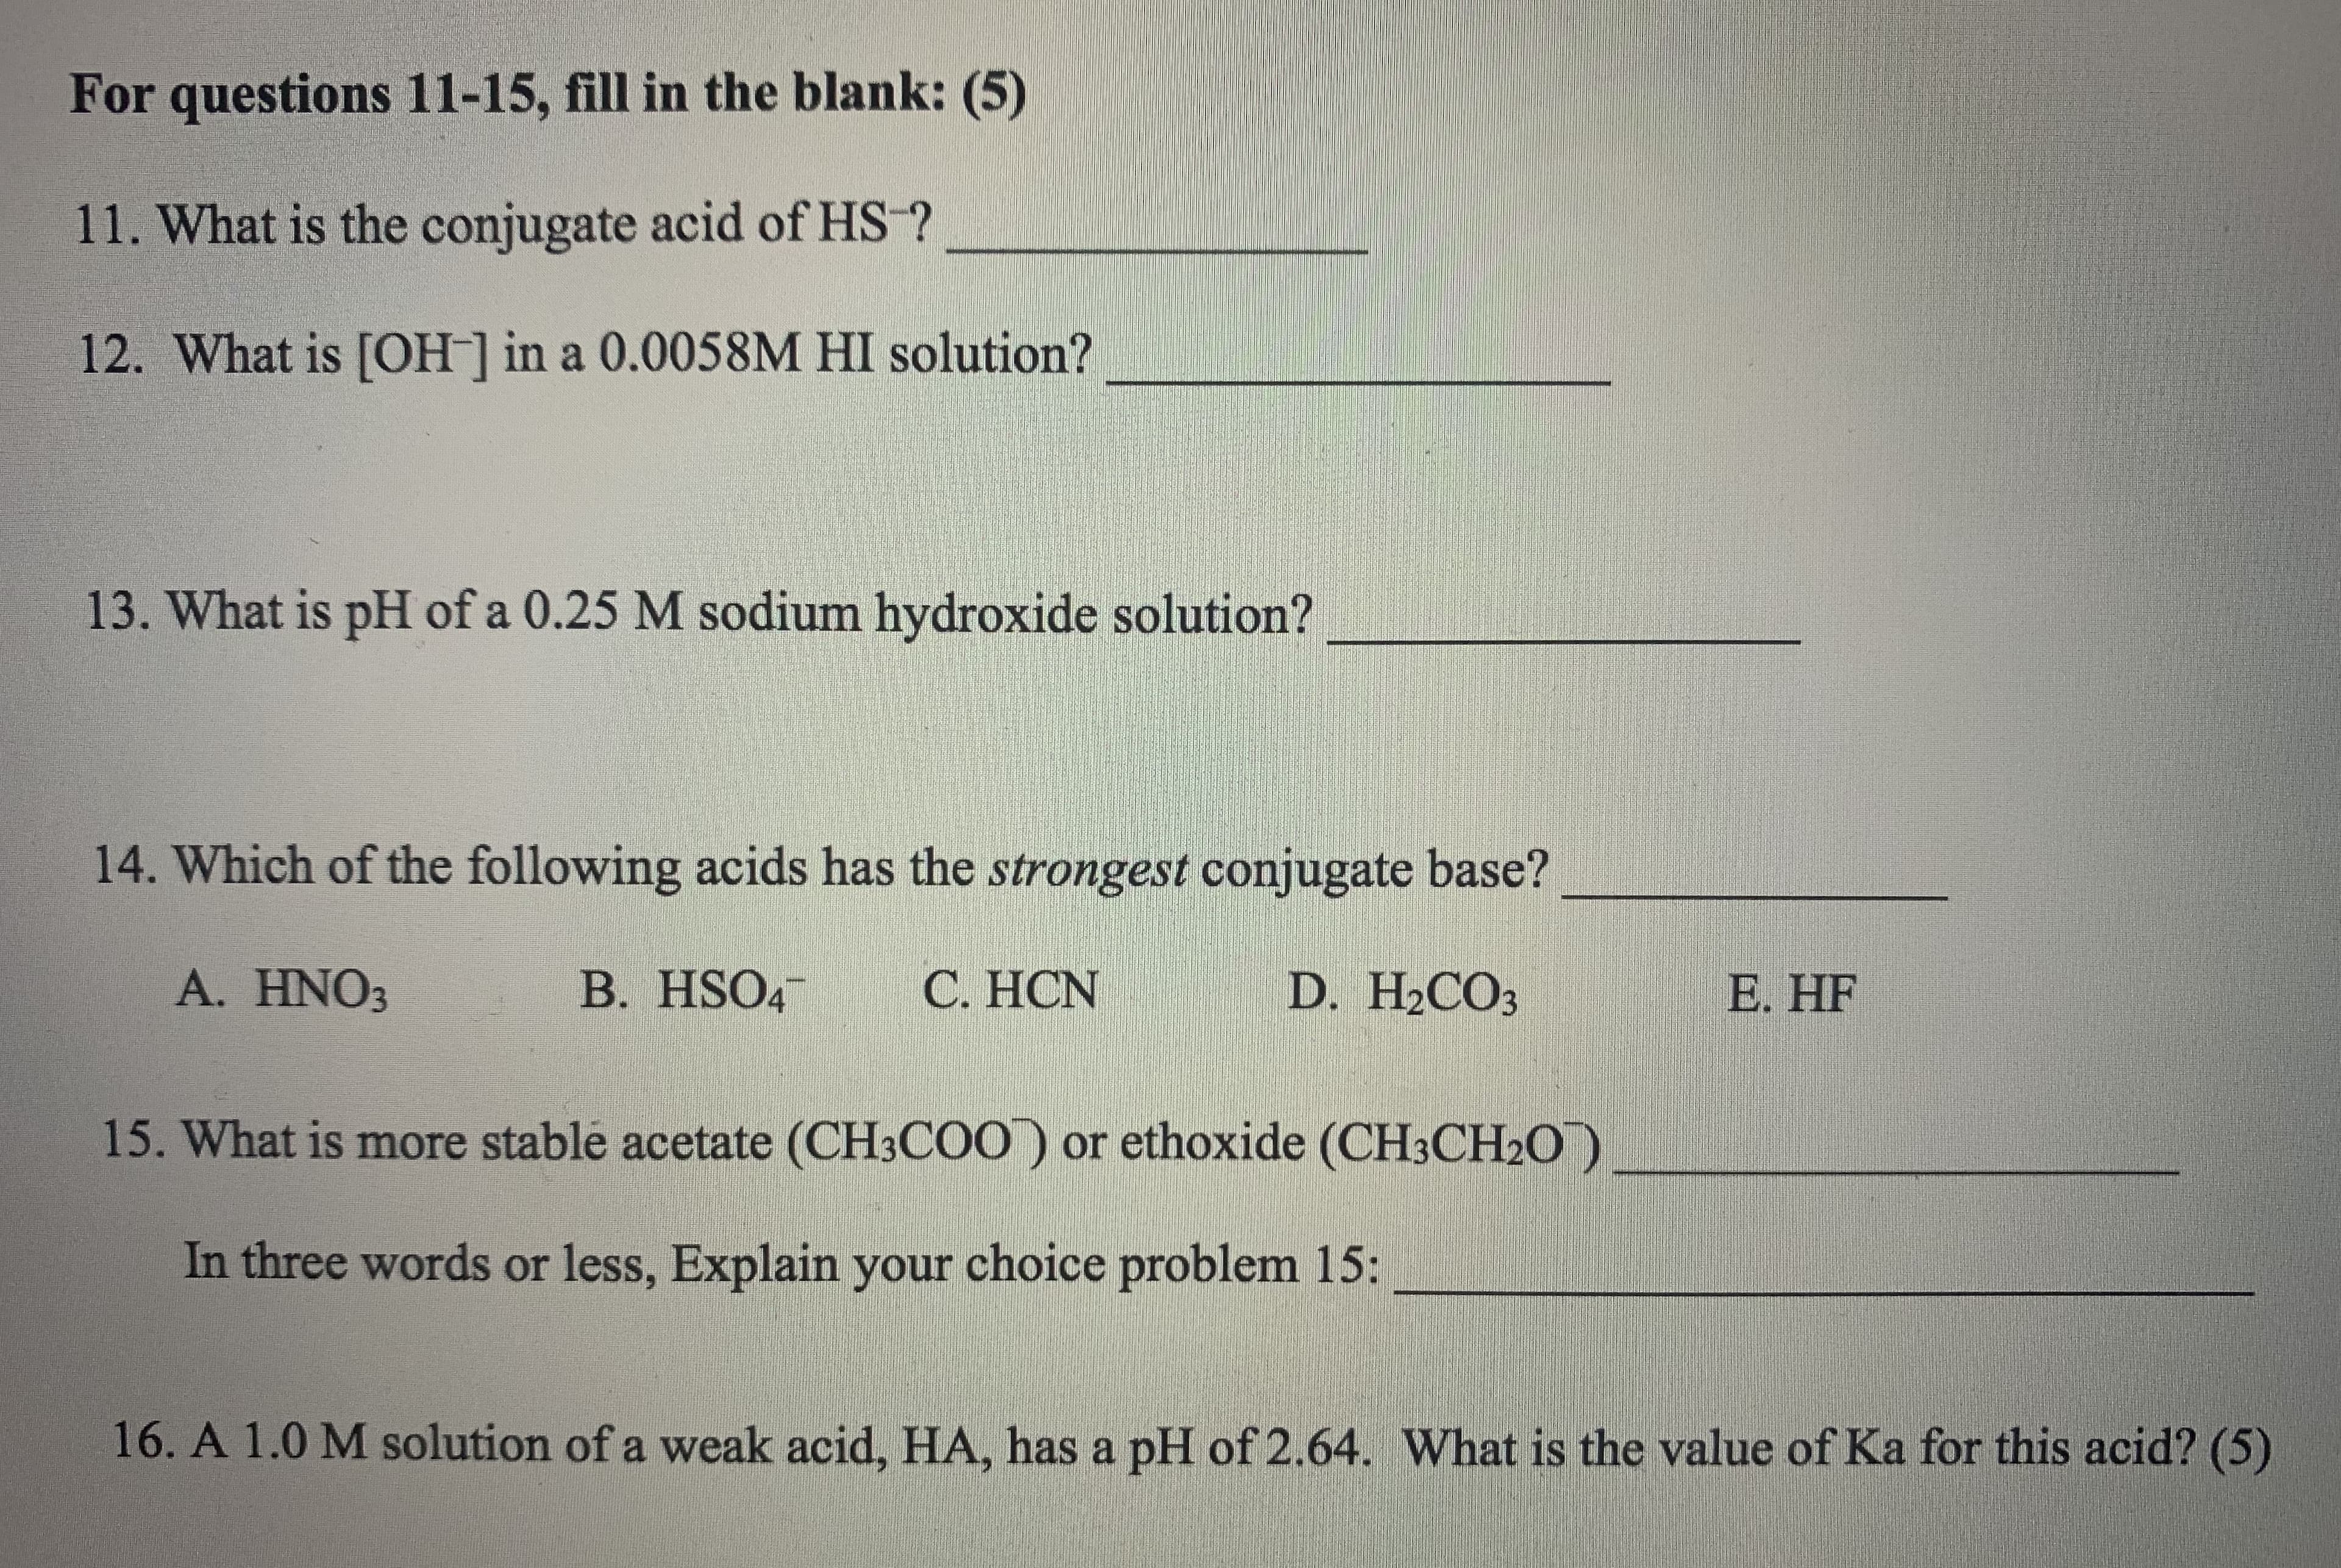 What is the conjugate acid of HS-?
